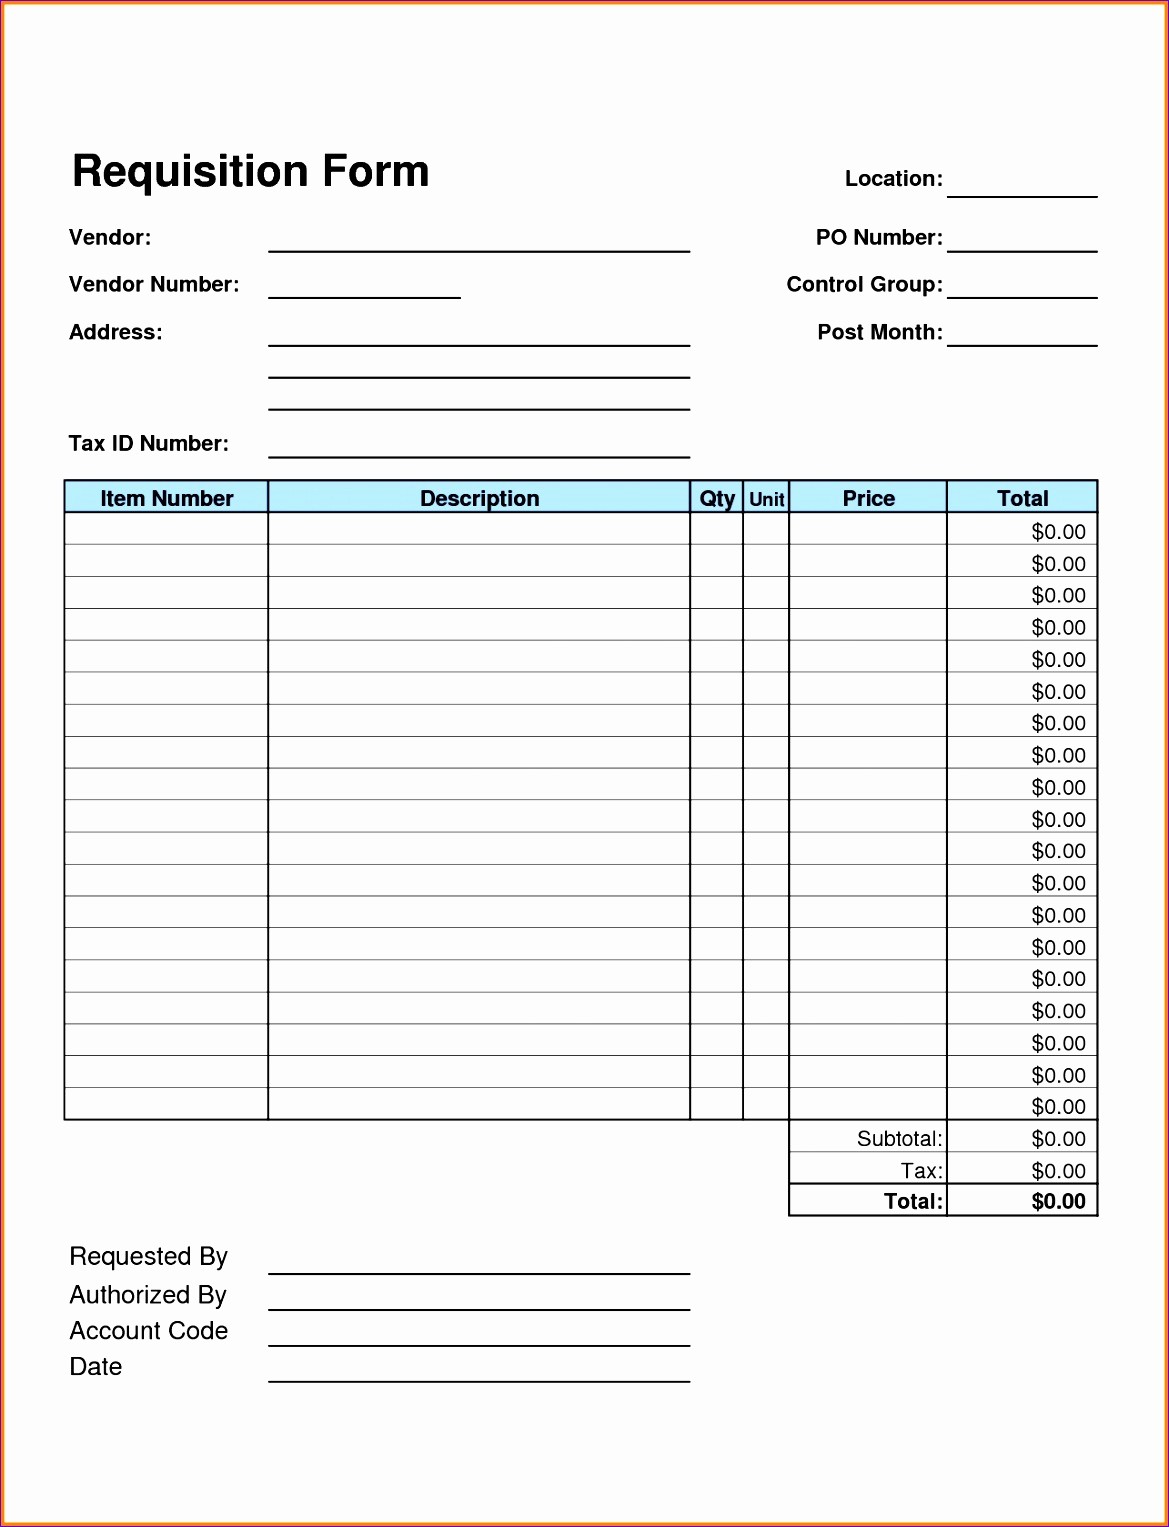 Travel Request form Template Excel Best Of 8 Travel Request Template Excel Exceltemplates